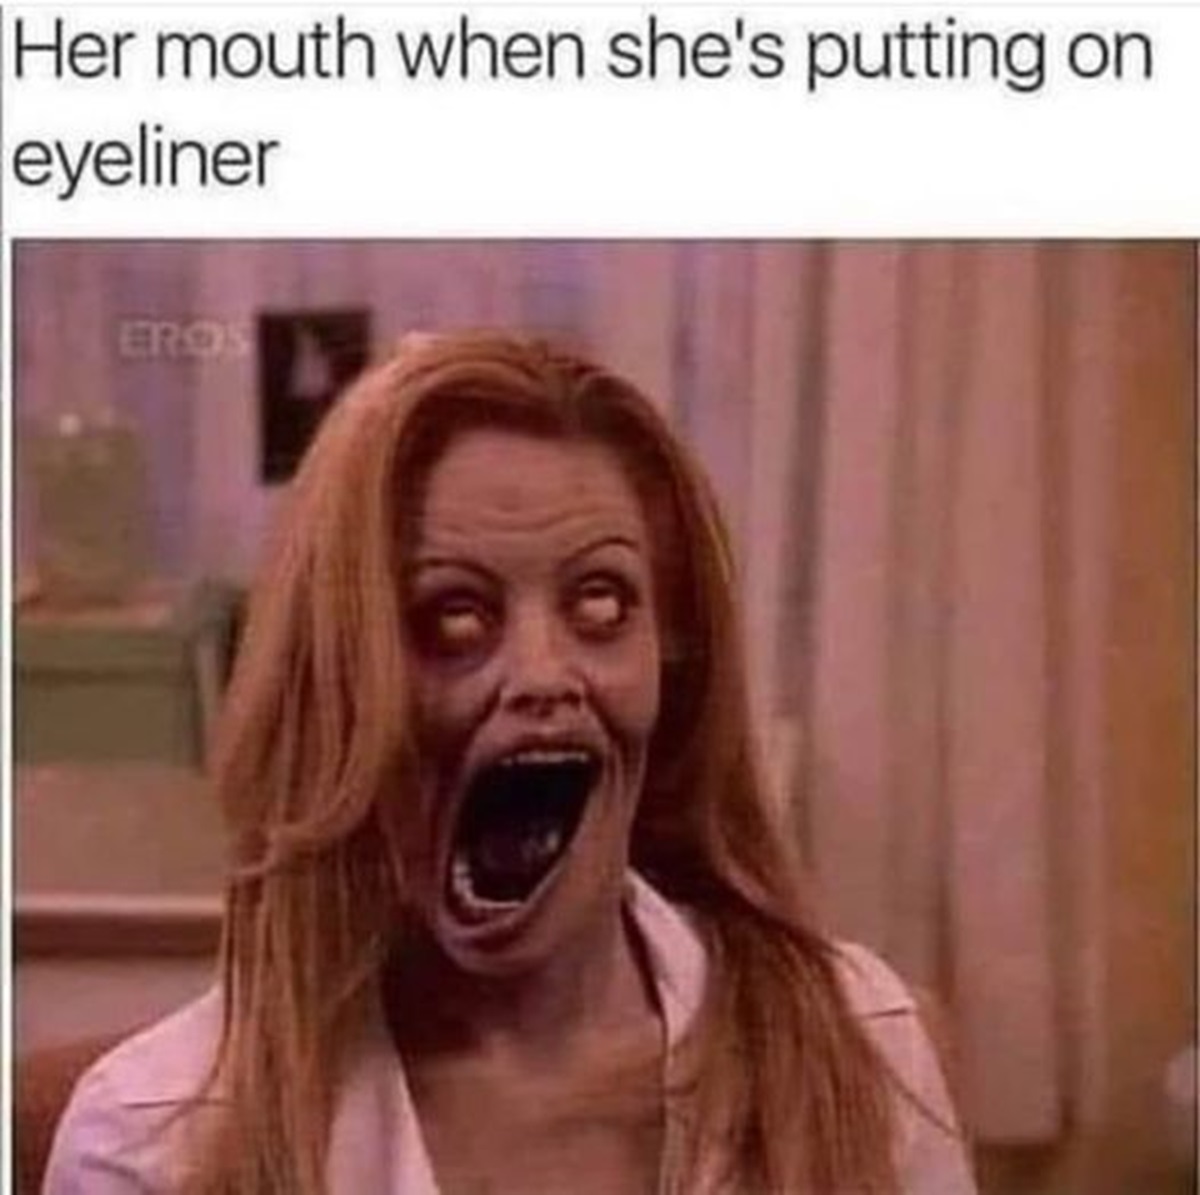 photo caption - Her mouth when she's putting on eyeliner Eros